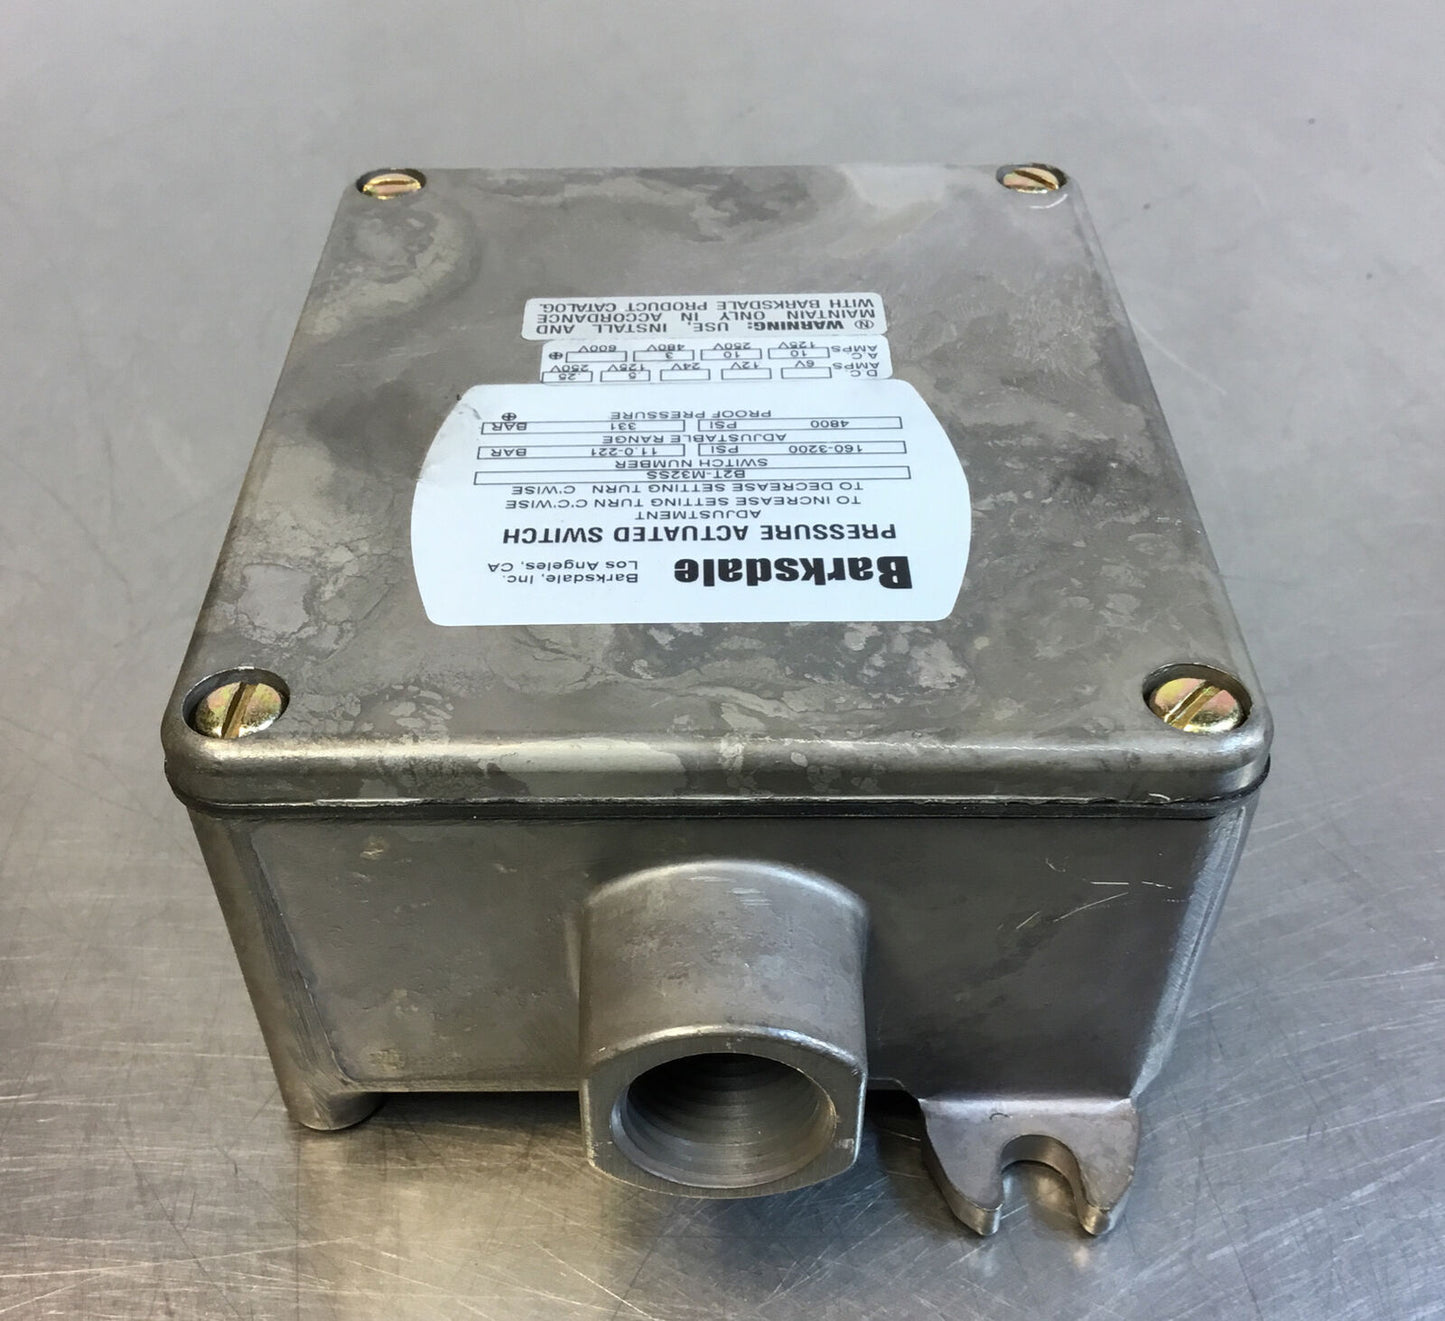 Barksdale Pressure Activated Switch B2T-M32SS 160-3200 PSI 4800 Proof Press  6C